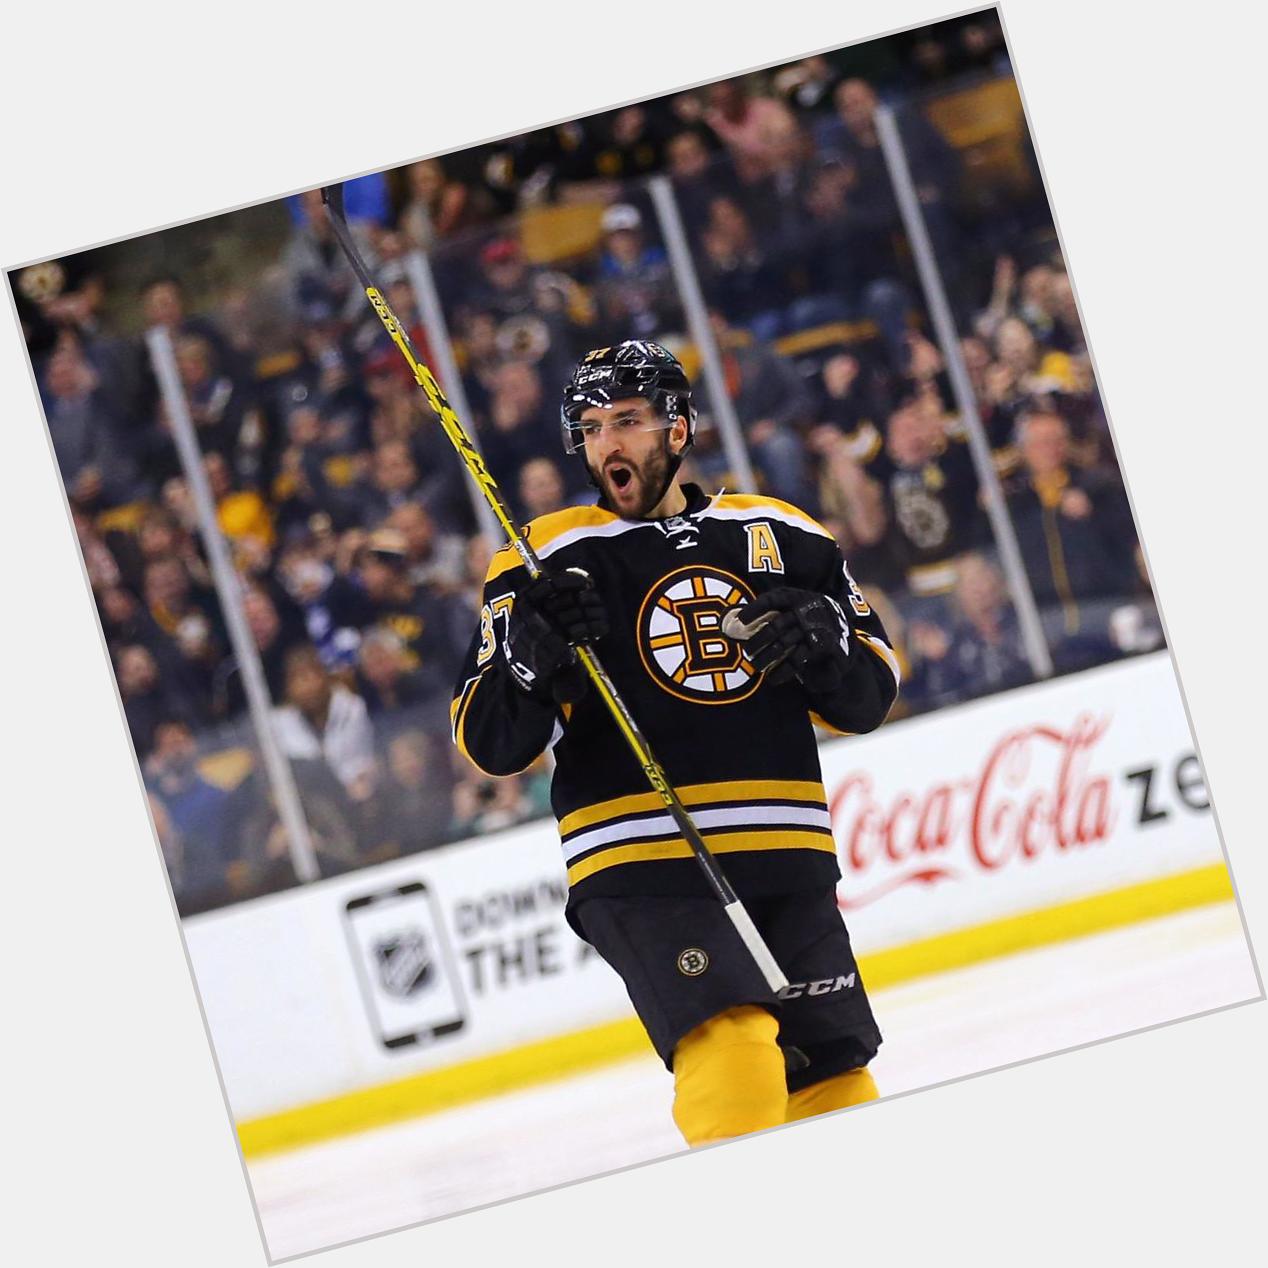 Remessage to wish Patrice Bergeron a happy 30th birthday! 